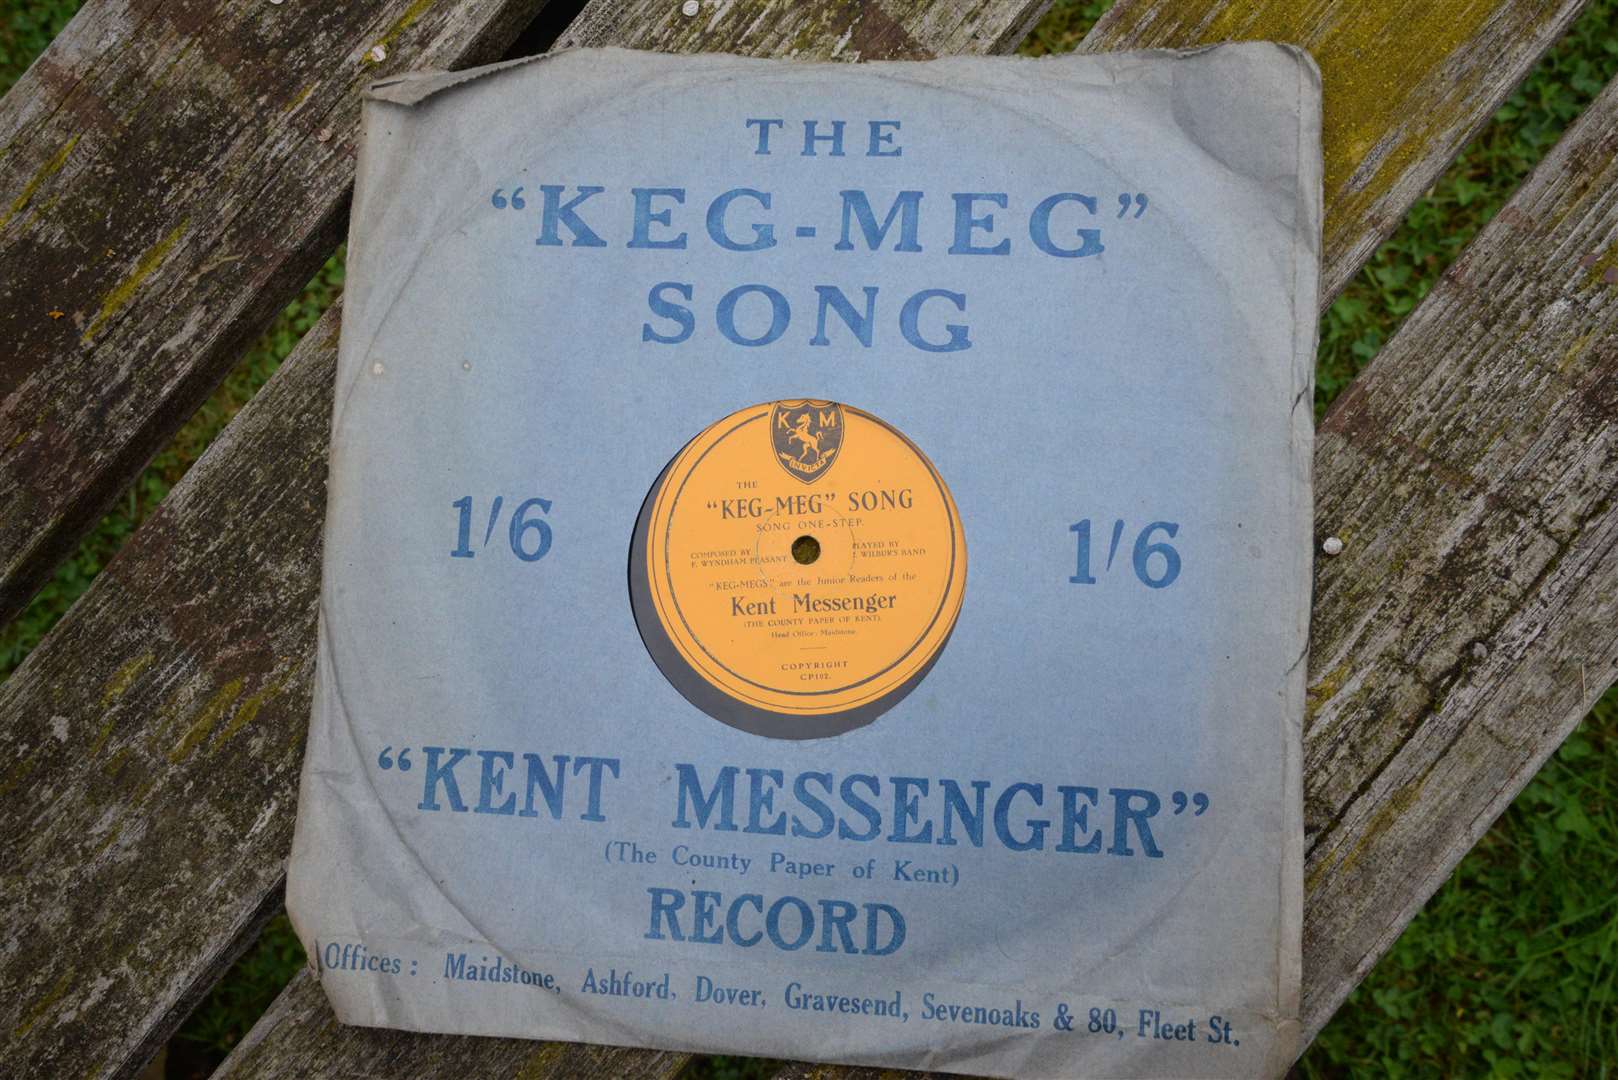 The old Kent Messenger record